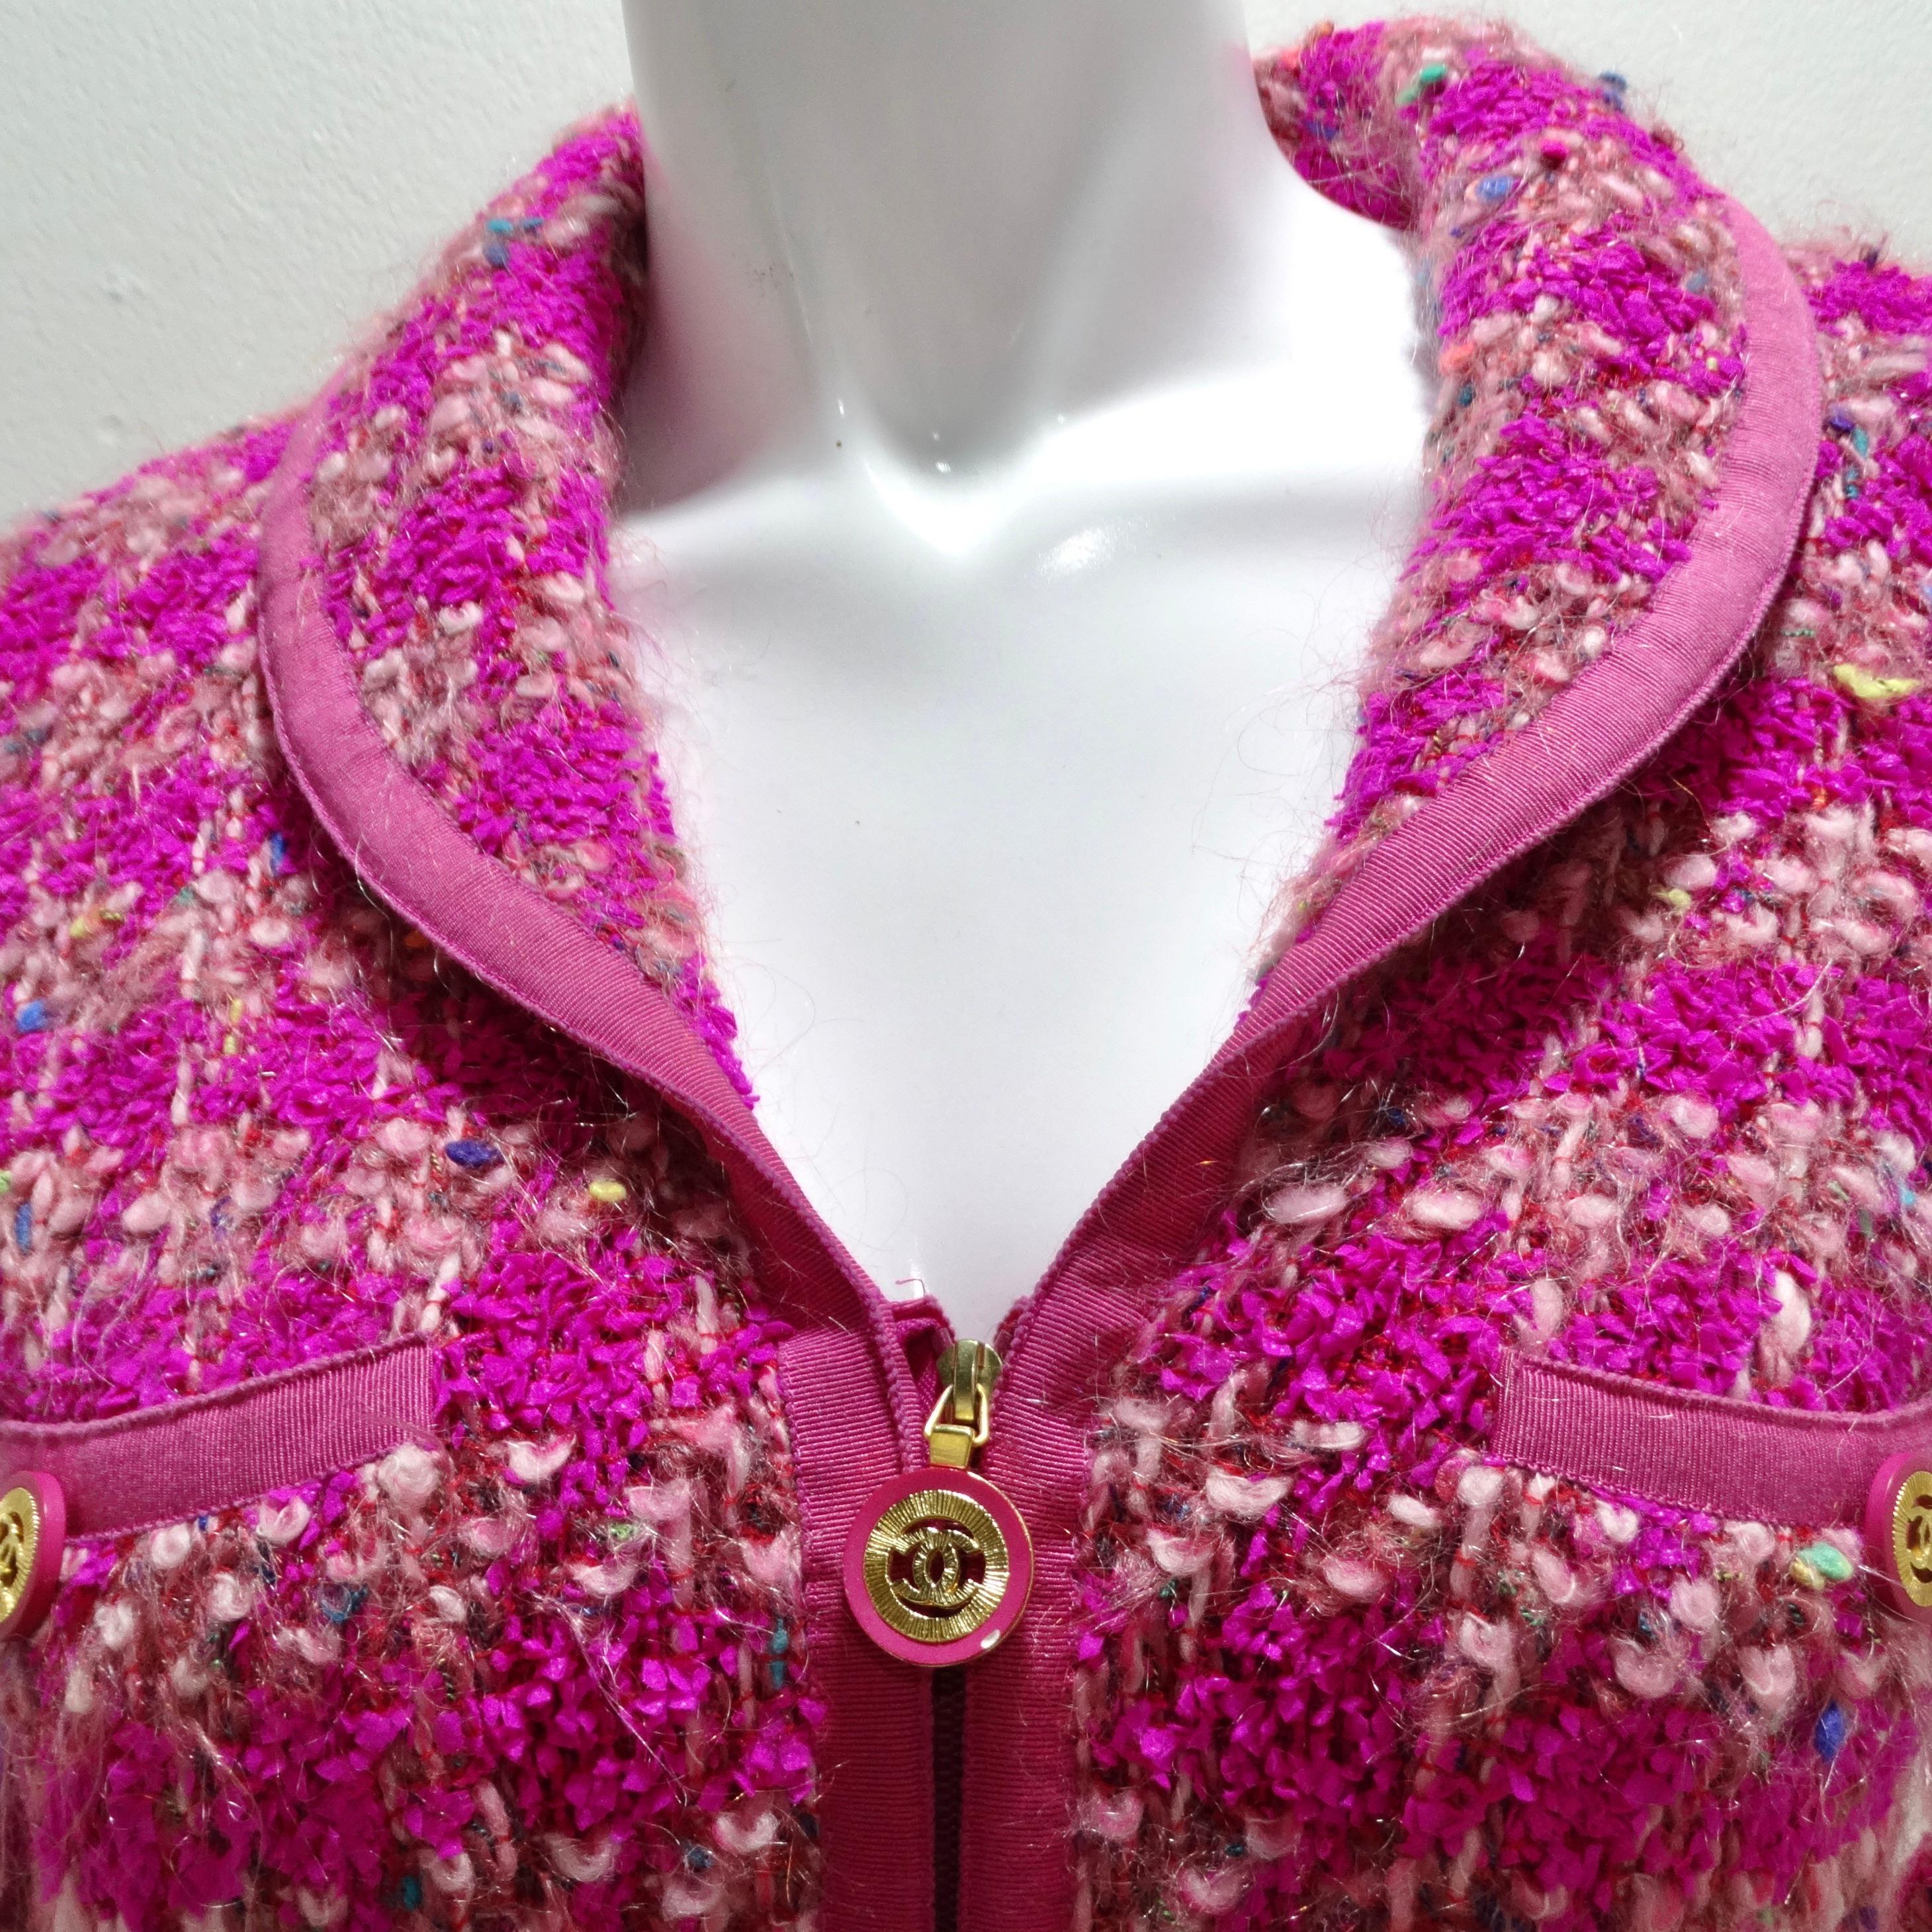 Step into the epitome of glamour with the Chanel Fall 1991 Hot Pink Tweed Jacket, a masterpiece of luxury and playfulness. This exquisite zip-up jacket combines timeless sophistication with a burst of fun. Revel in the details, from the chic collar